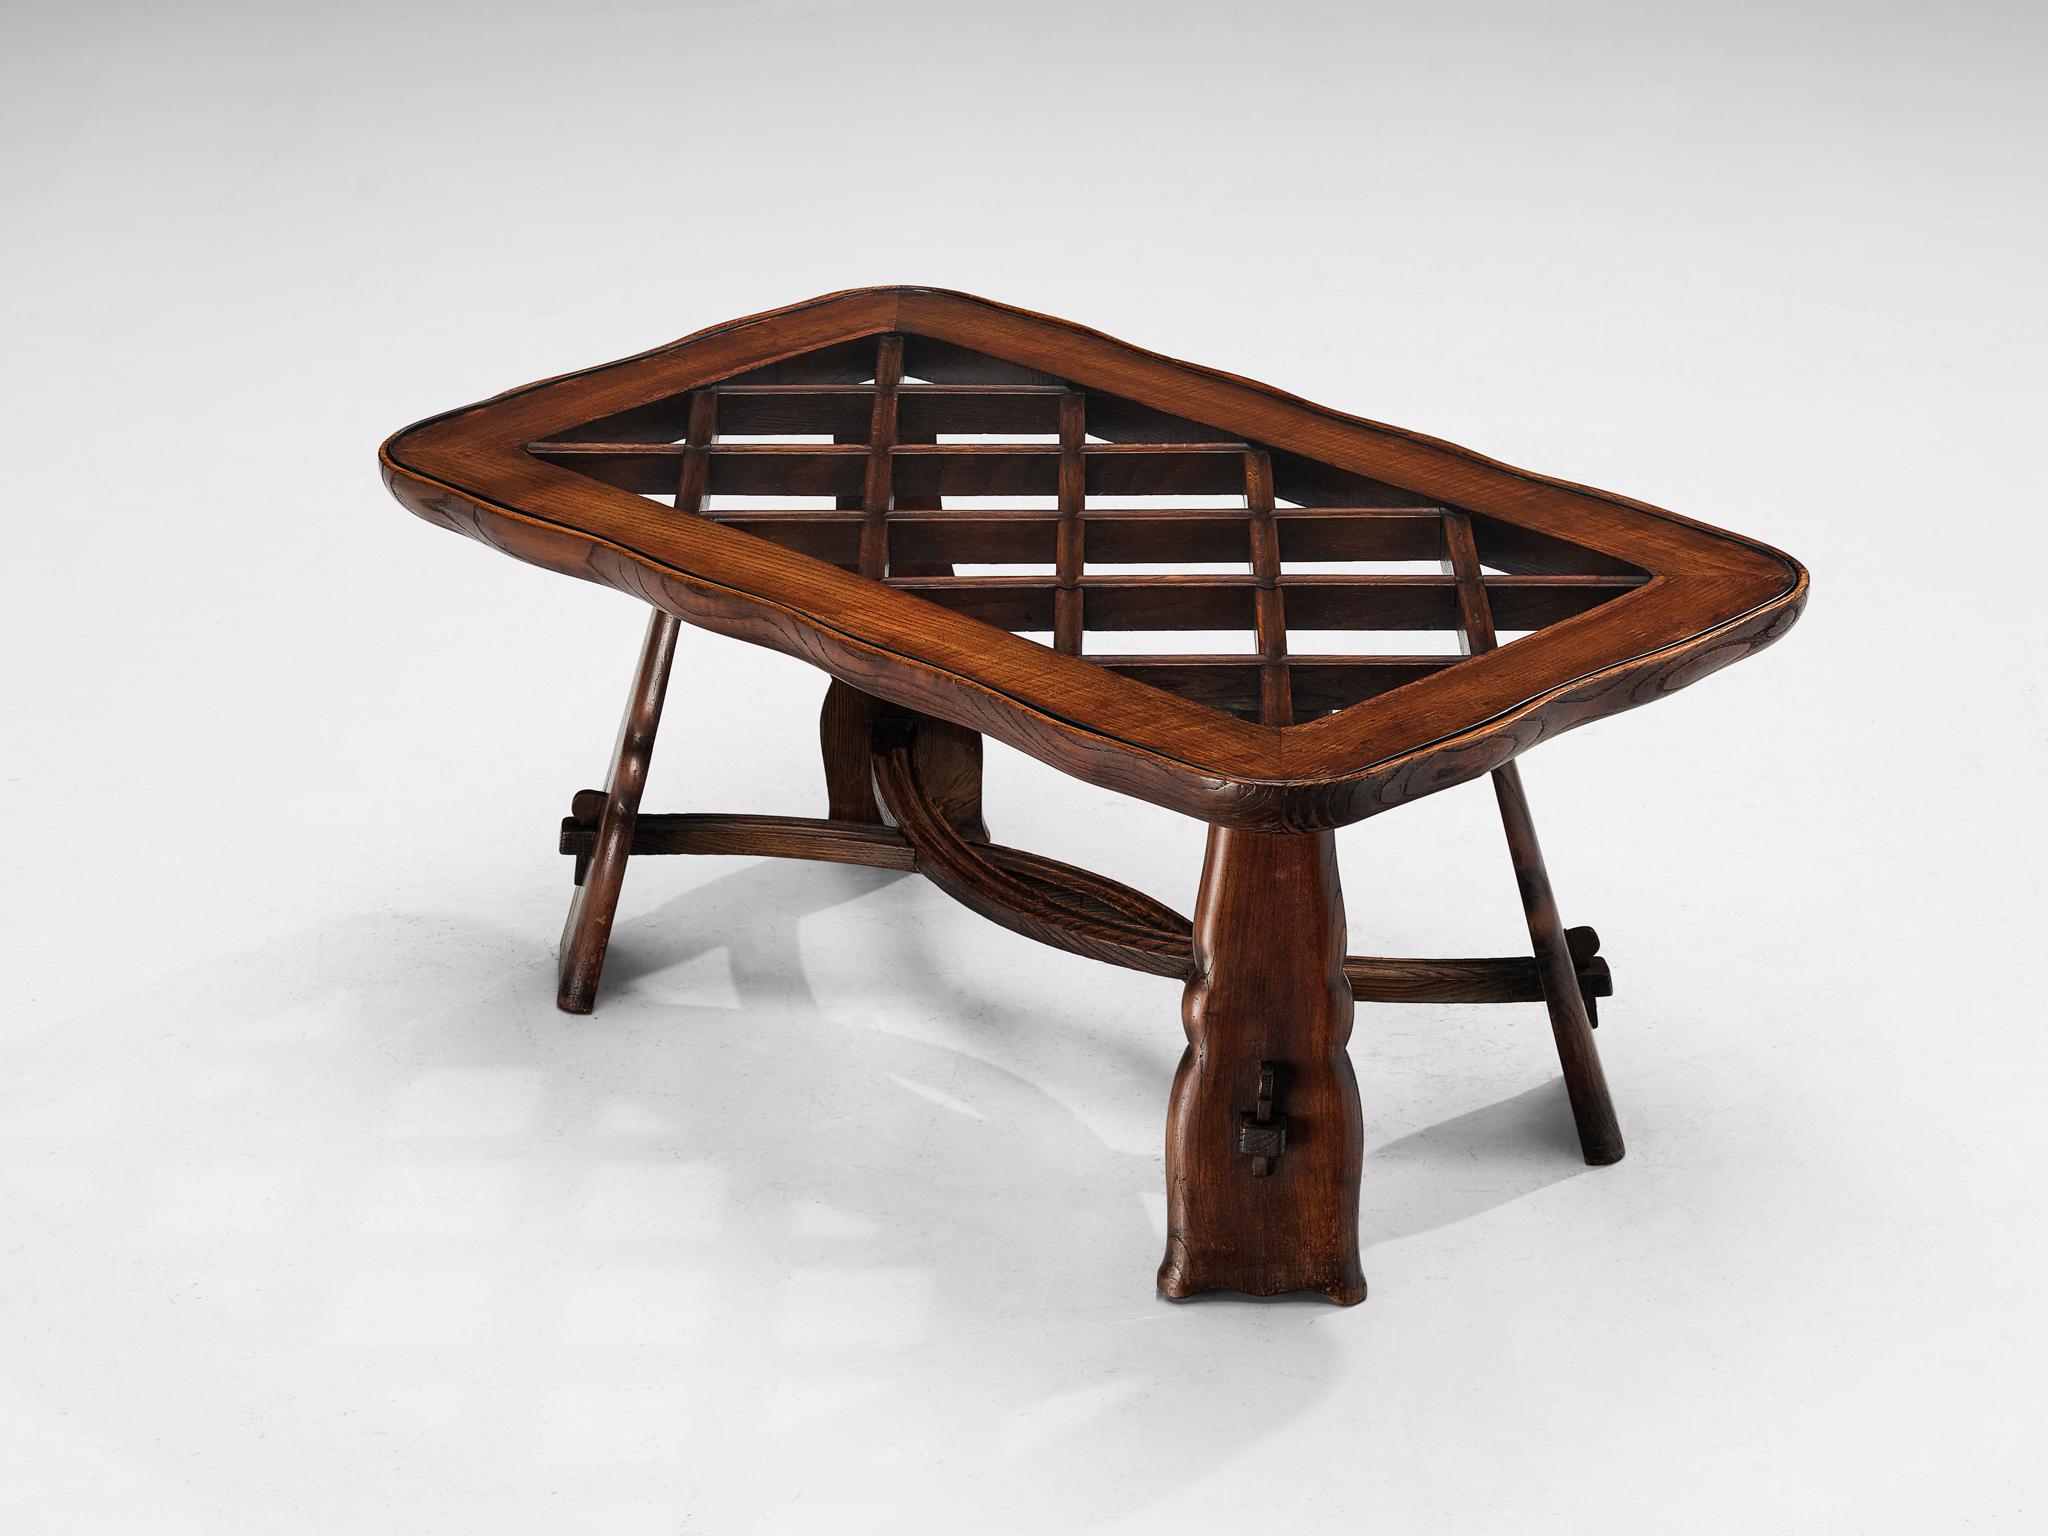 Valabrega Studio, coffee table, chestnut, glass, Italy, circa 1935

The Valabrega furniture studio once again proves its great eye for materialization and impeccable craftsmanship this piece is exemplary for. The design of the table draws